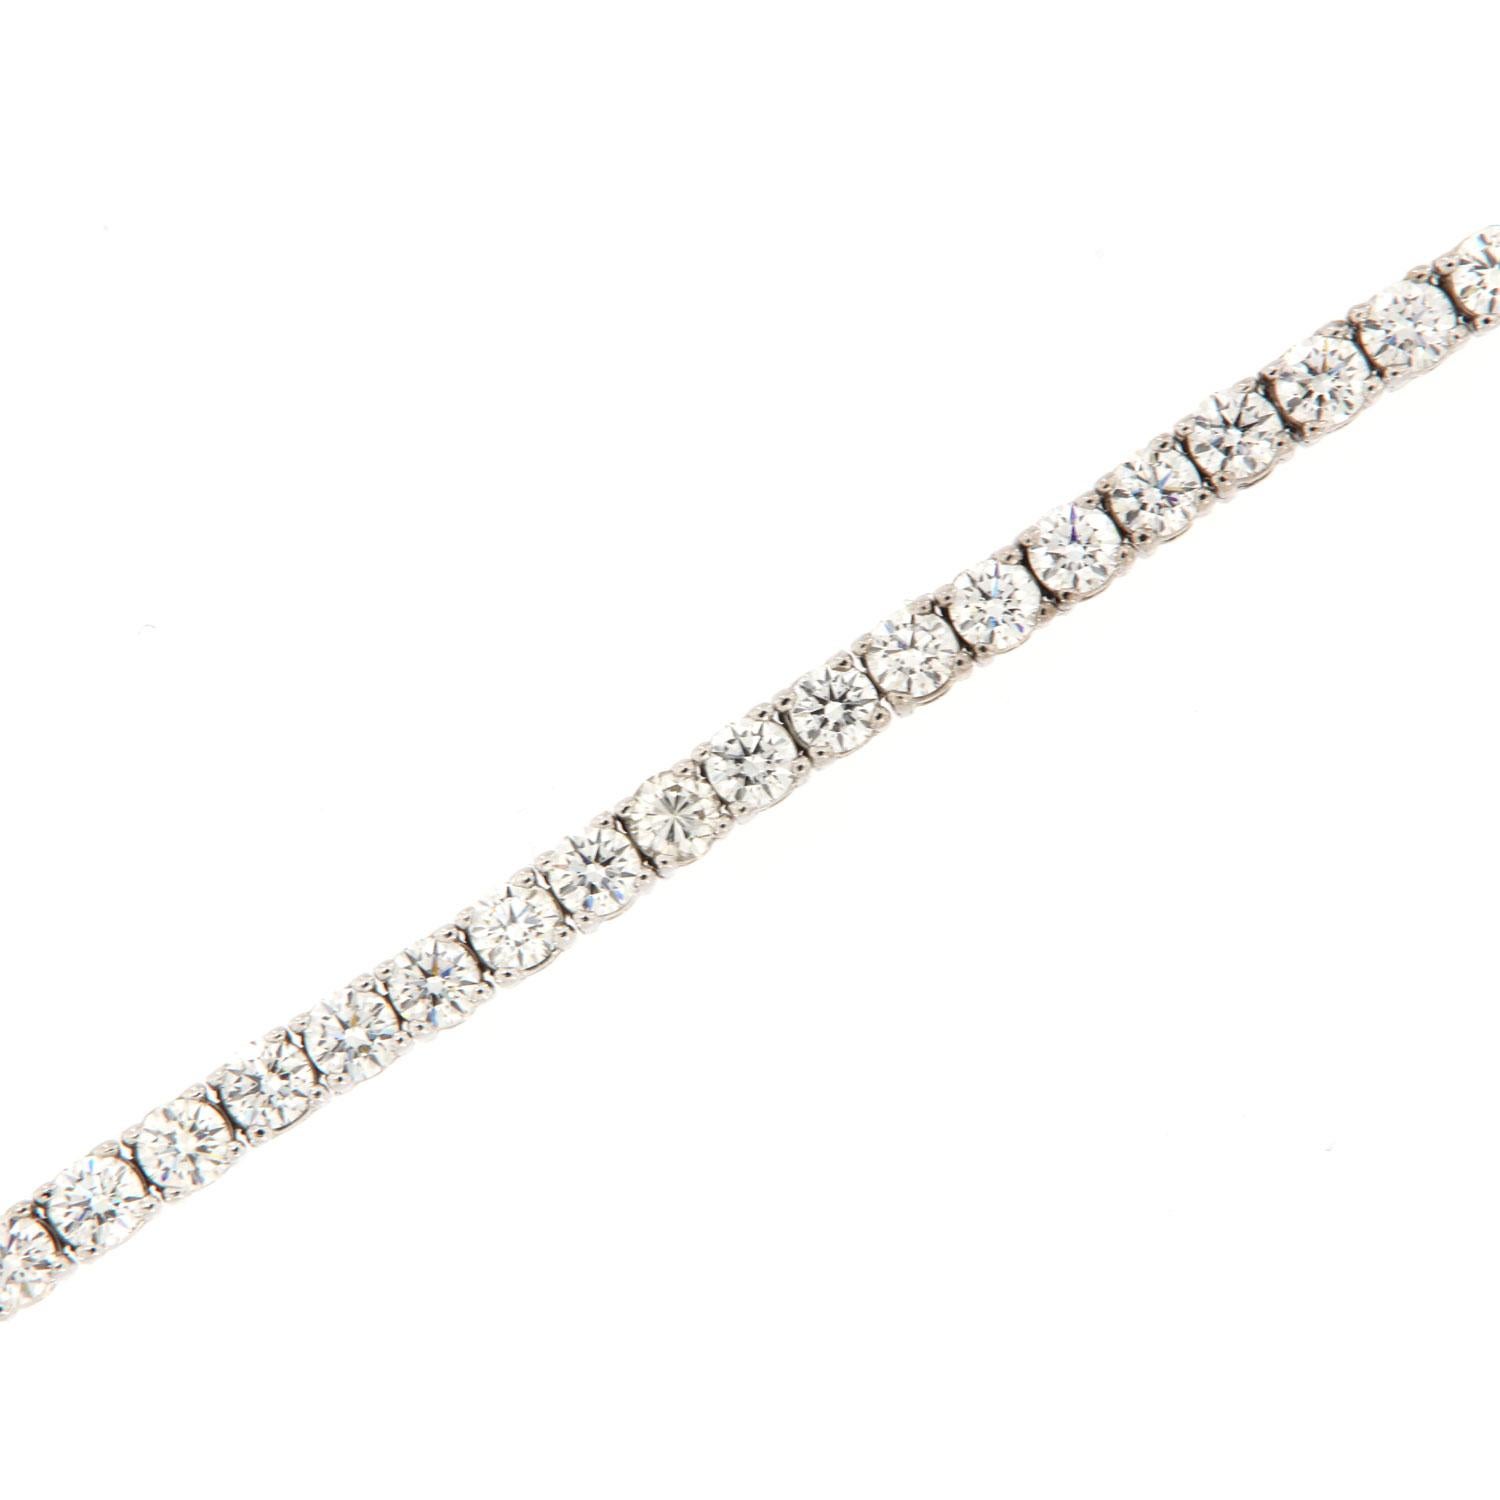 This tennis bracelet features perfectly matched Forty-Four (44) Round shape ideal cut diamonds in a total weight of 8.66 carats set in four (4) prongs 14k white gold. Average color G Average clarity VS2 in an excellent luster
The bracelet is 7